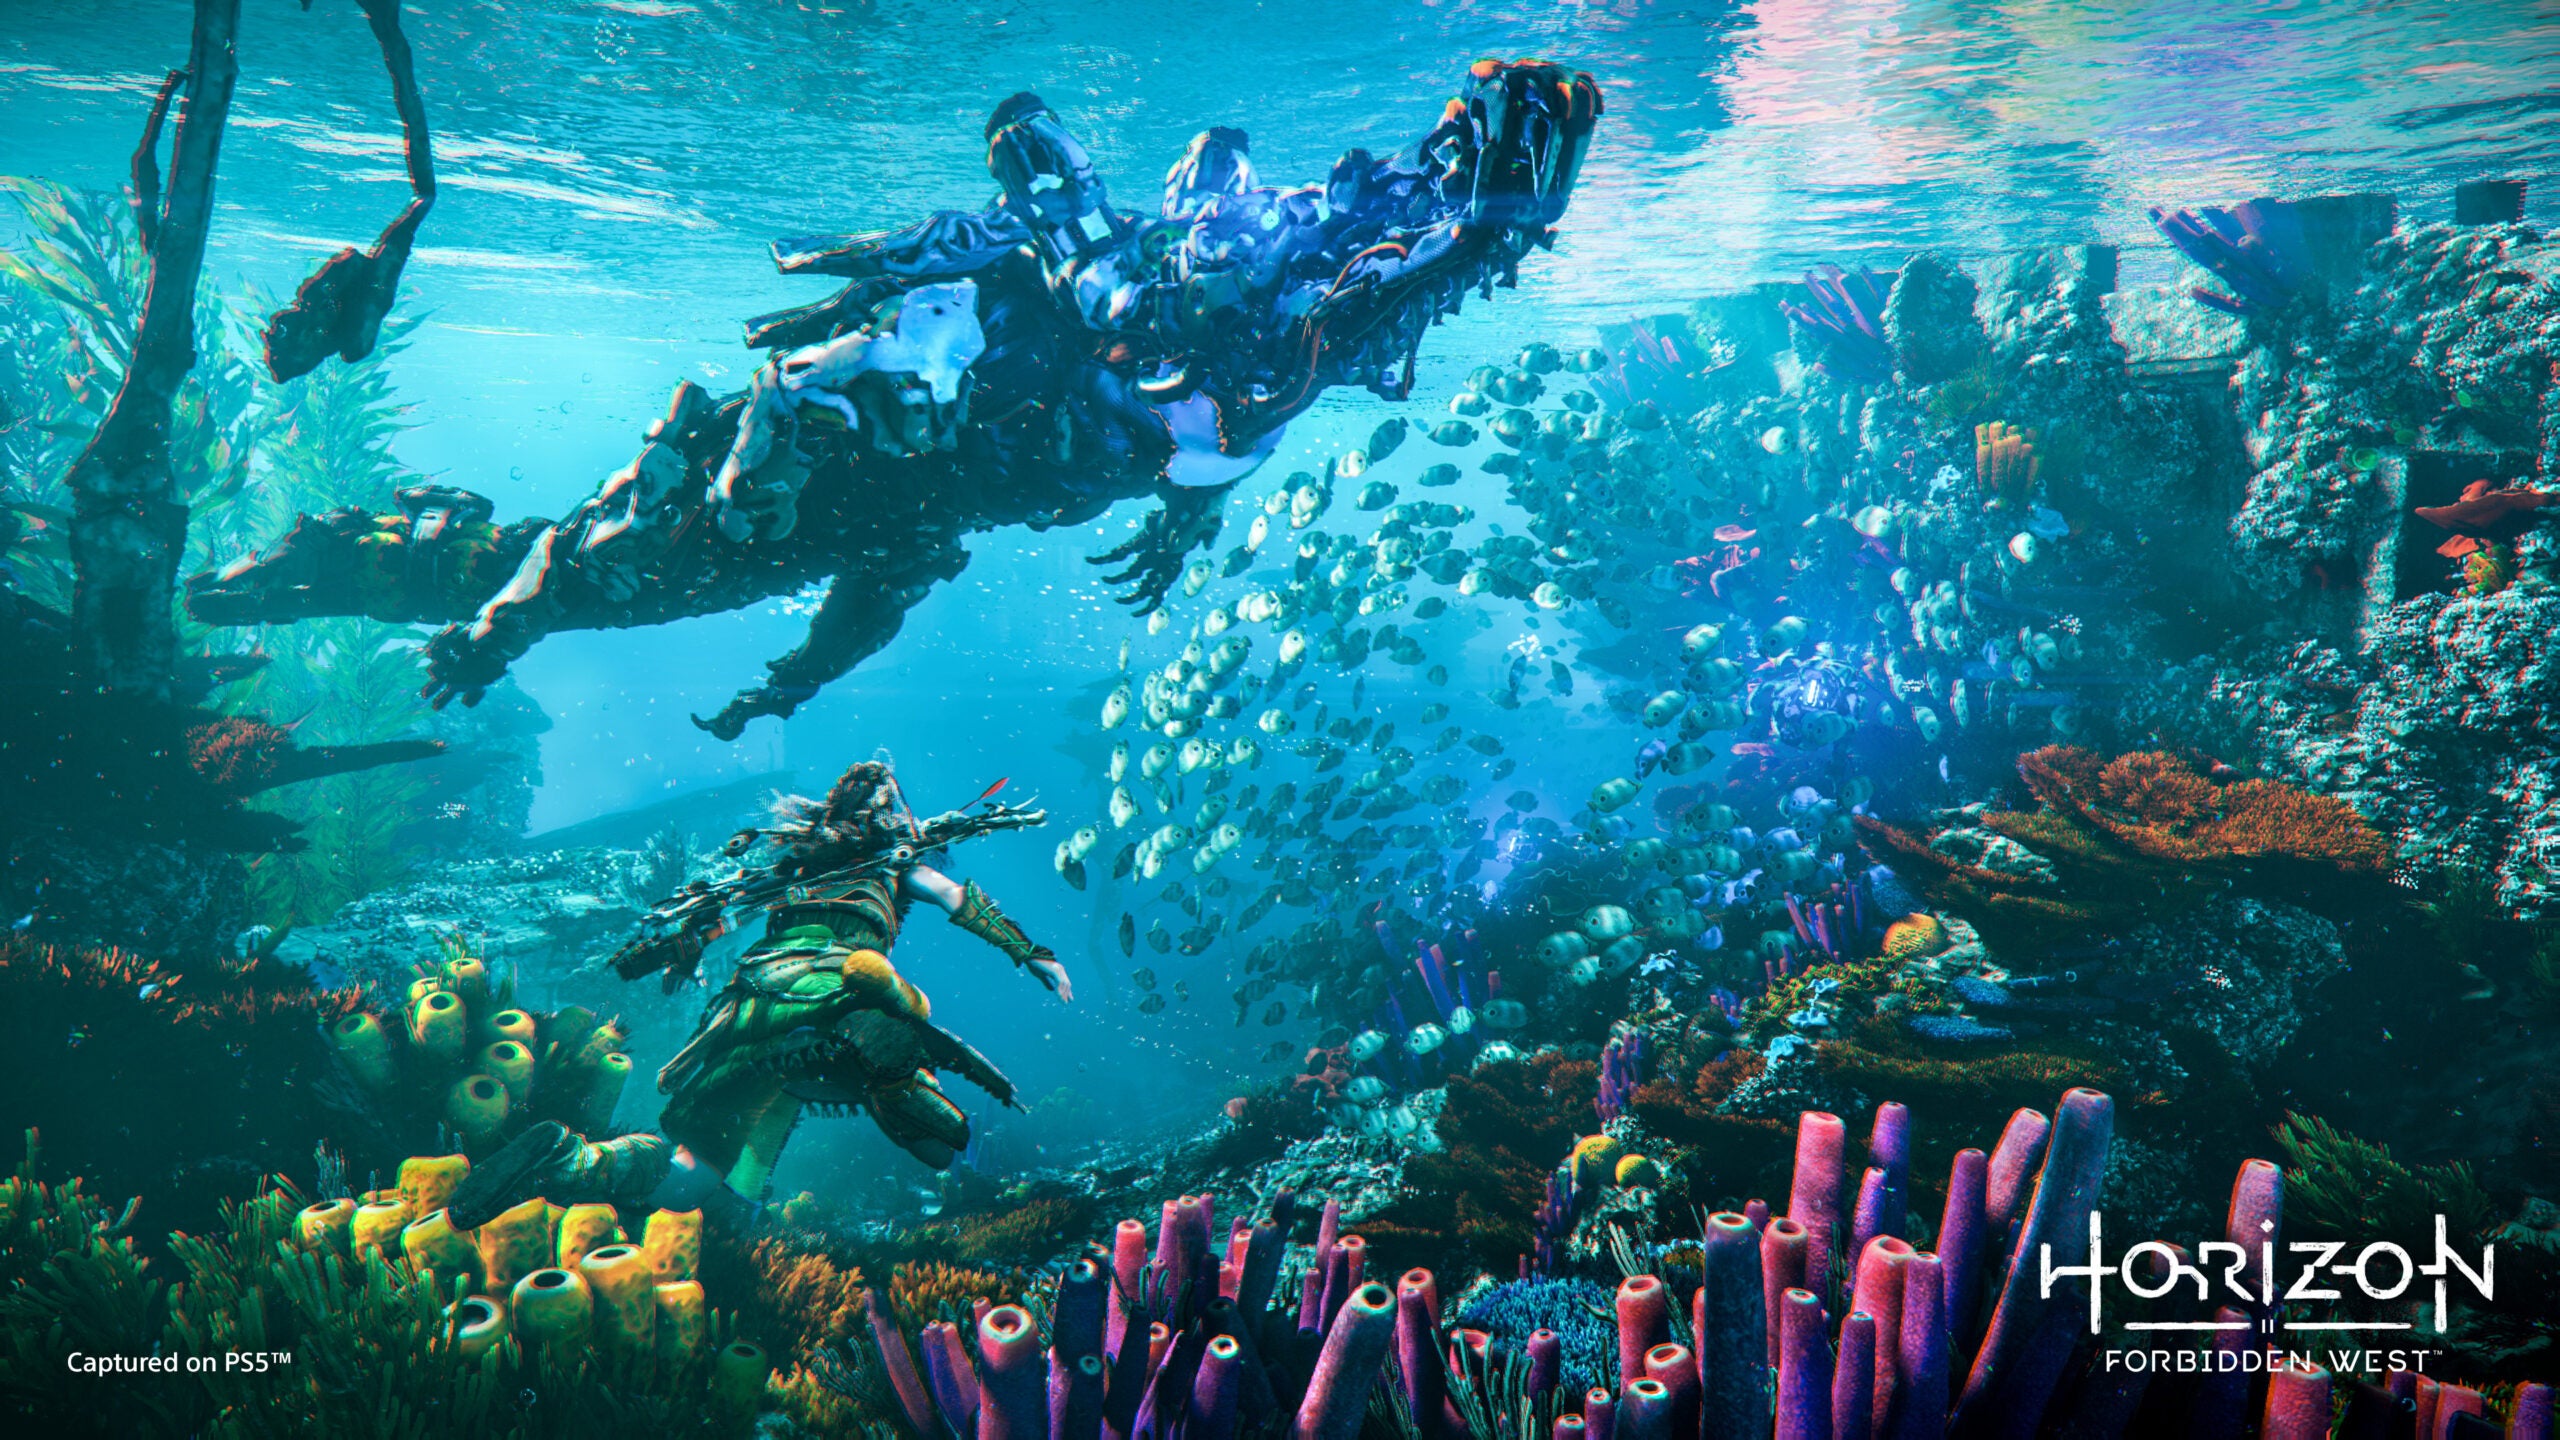 Image for Horizon Forbidden West is actually getting me excited for underwater levels